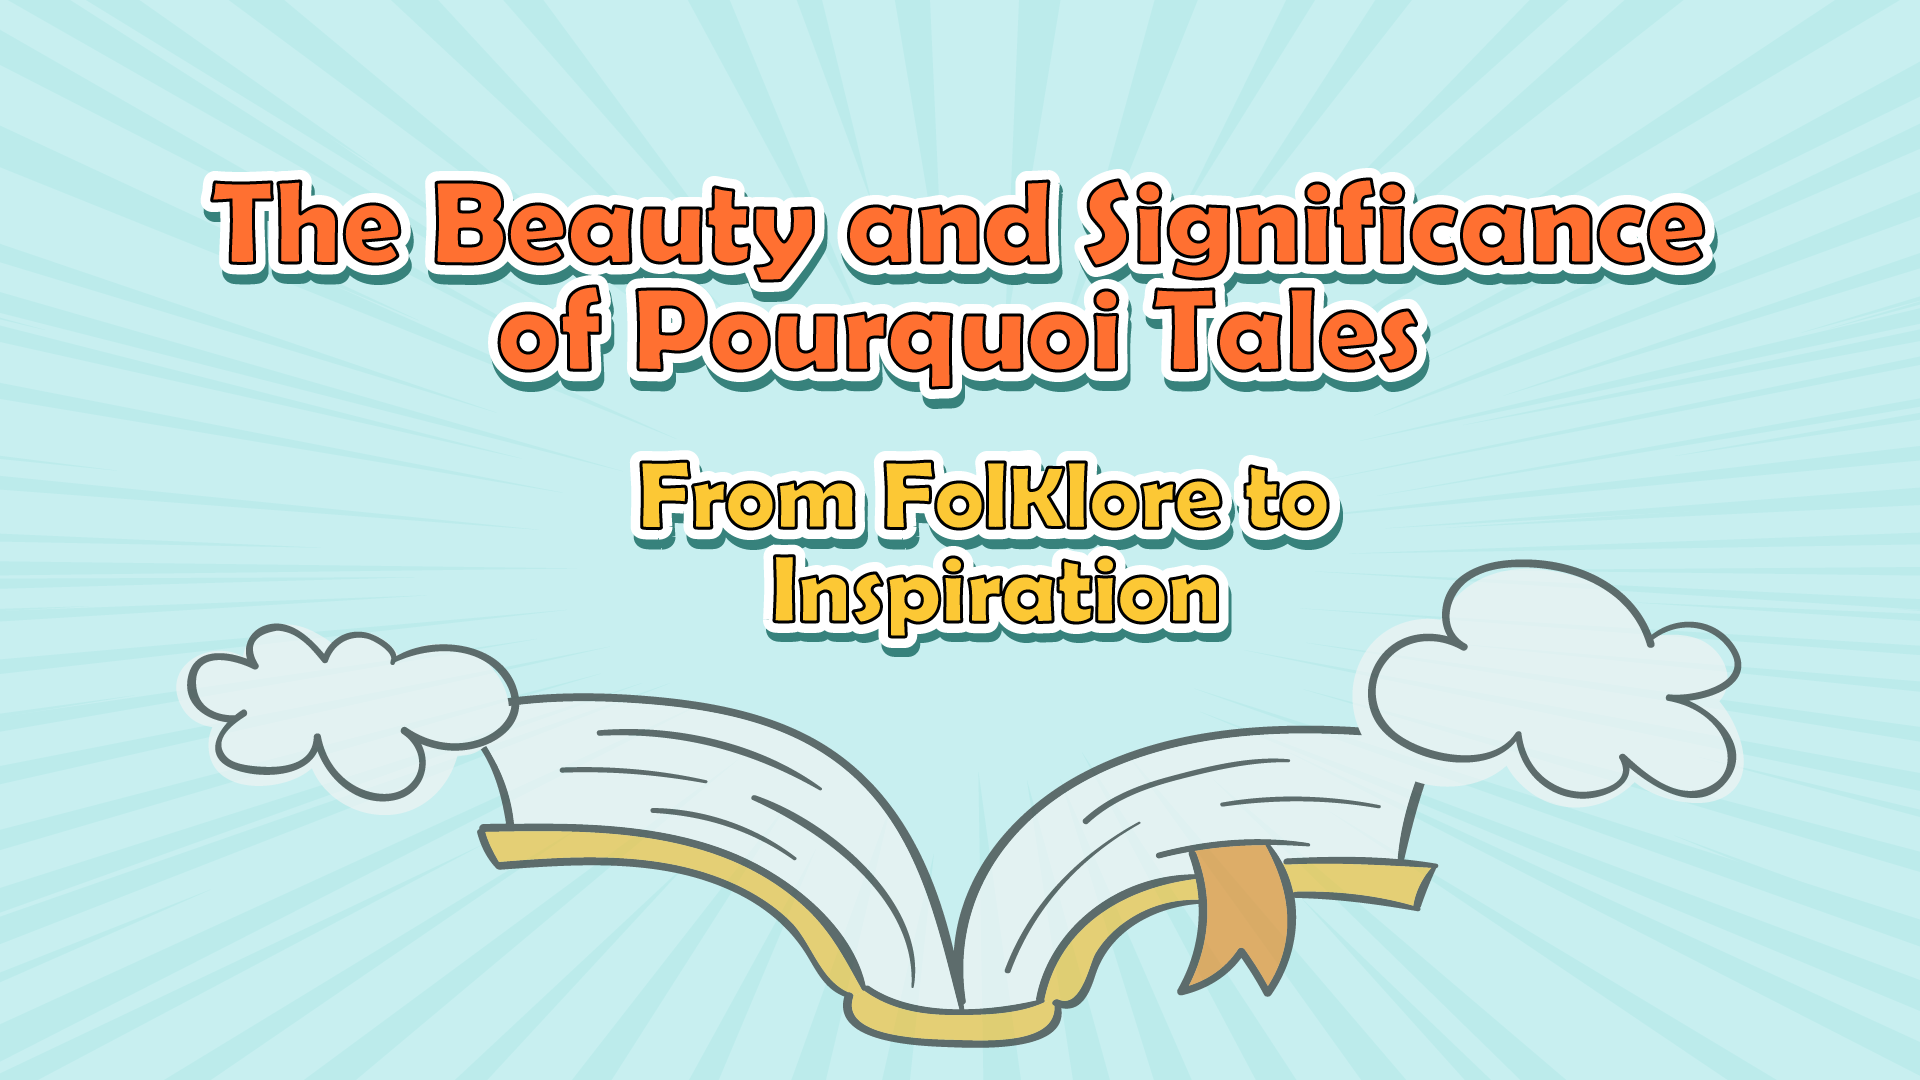 The Beauty and Significance of Pourquoi Tales: From Folklore to Inspiration